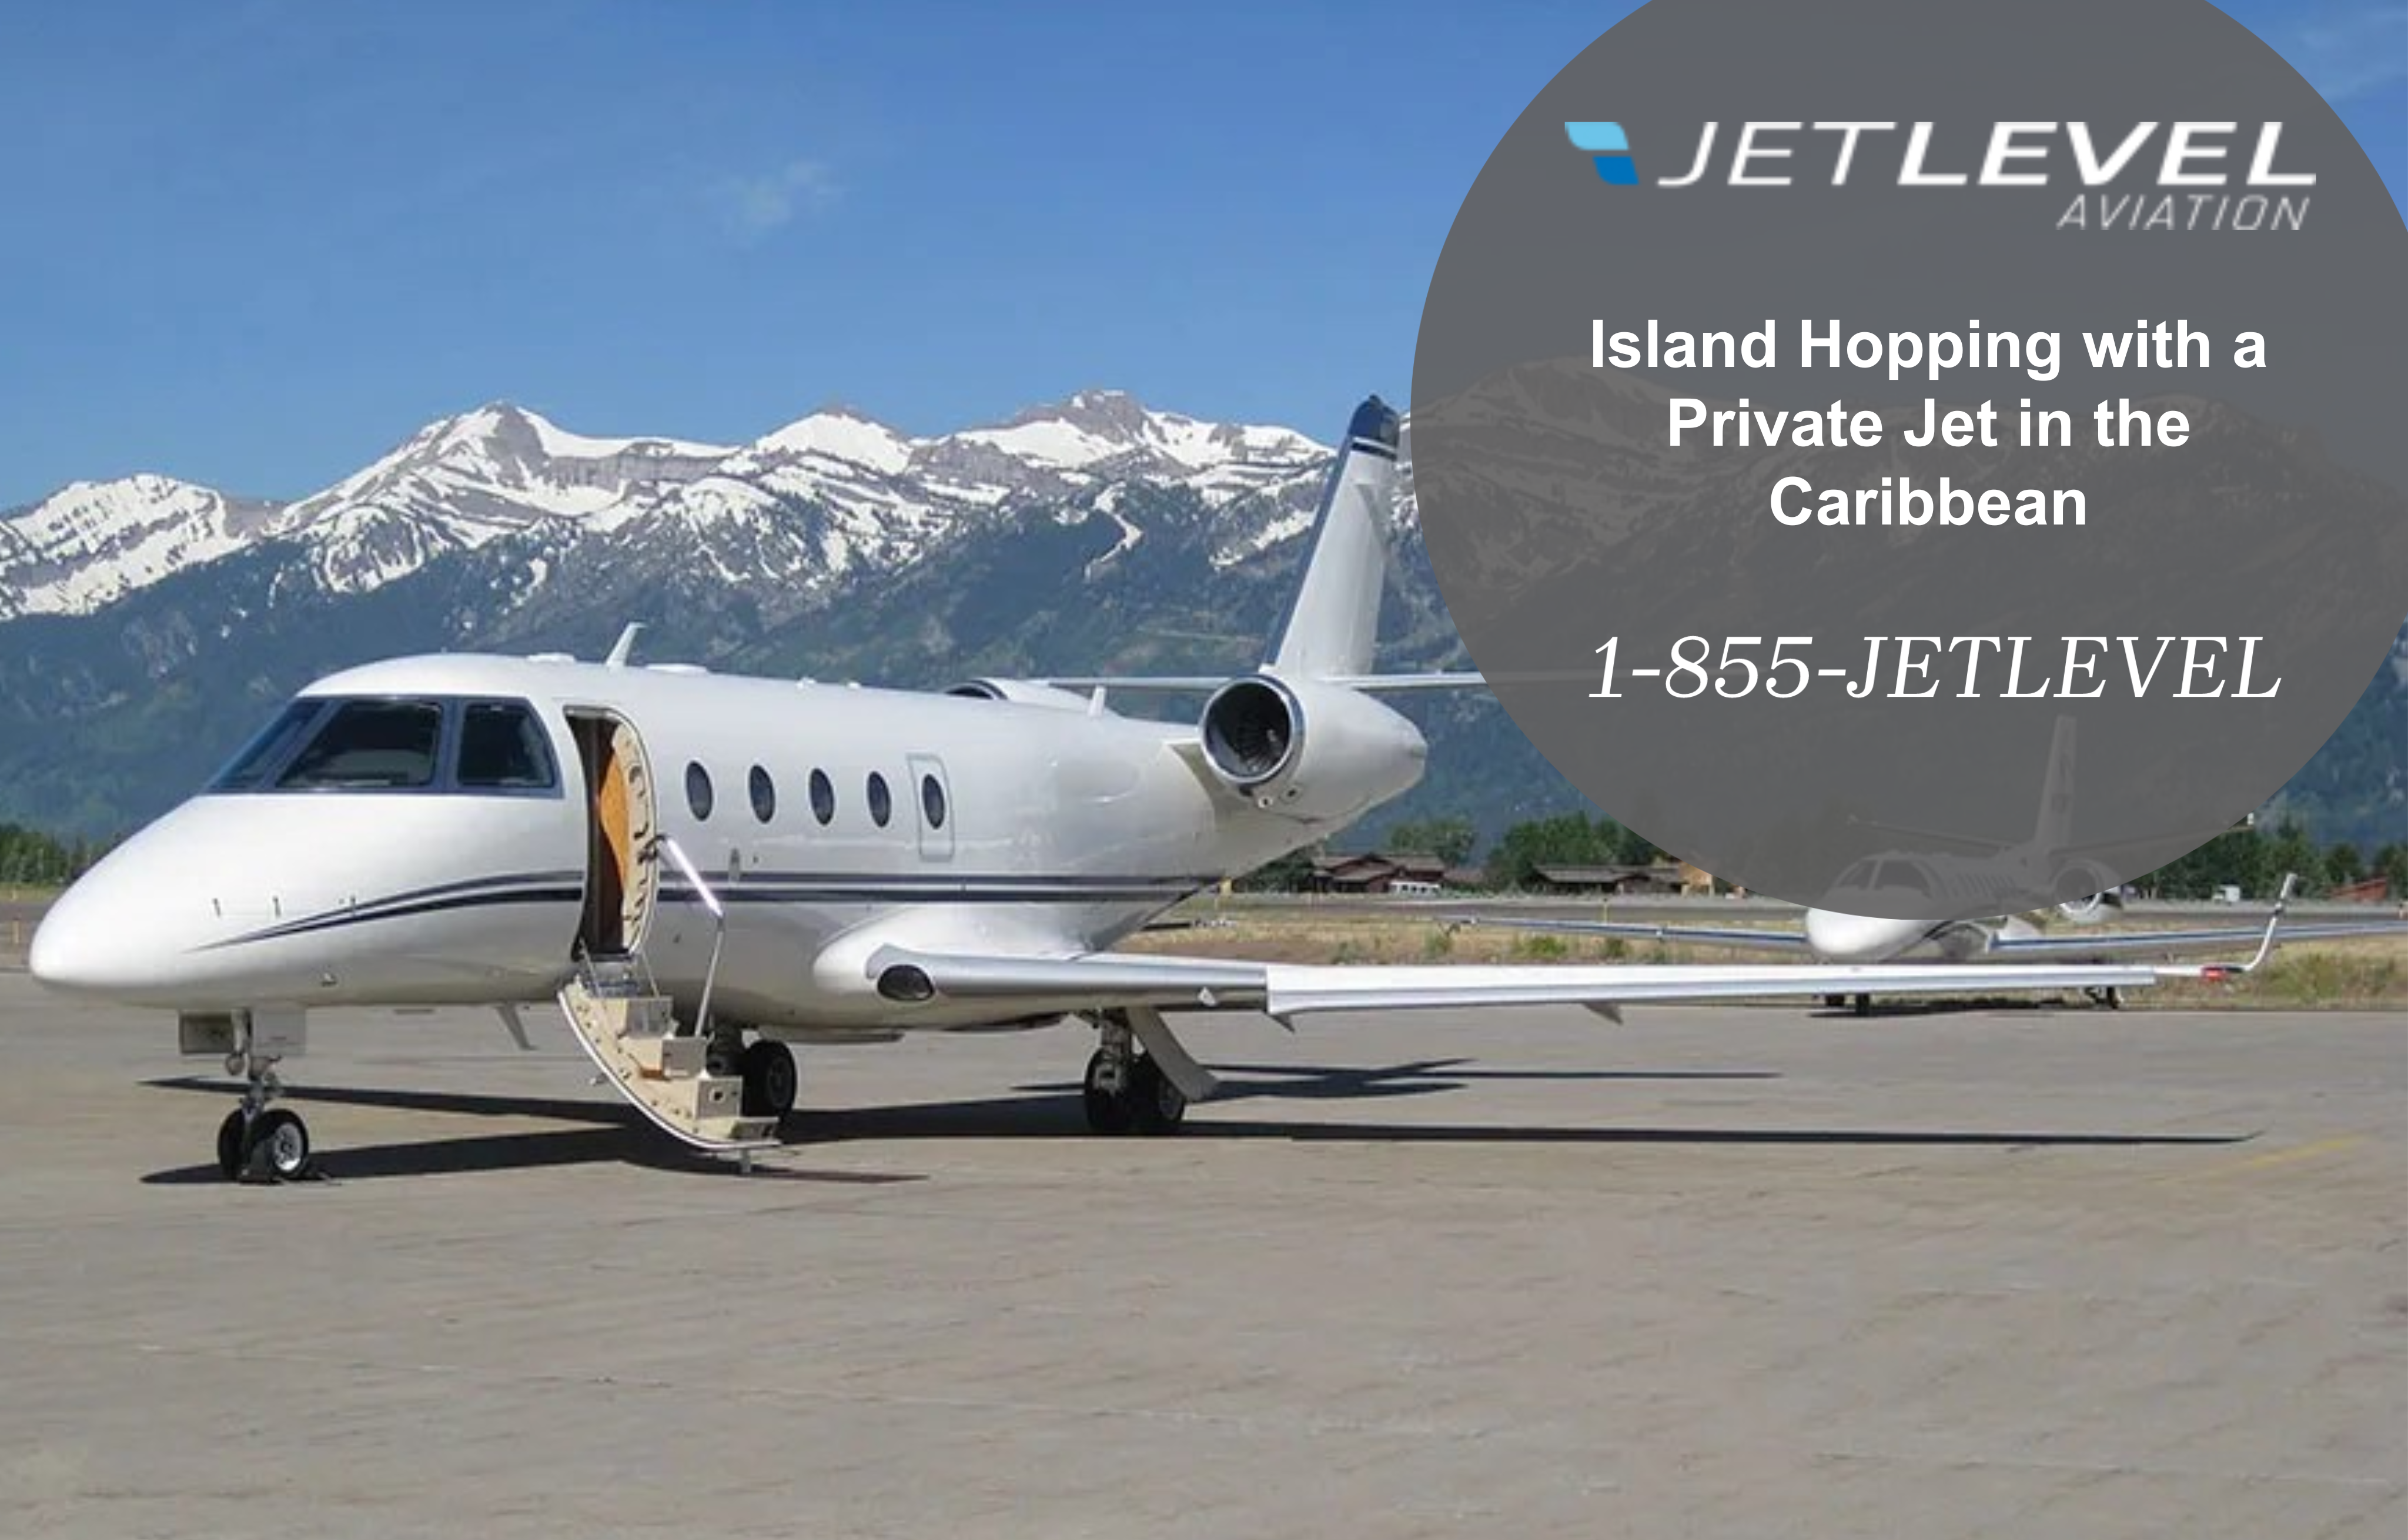 Island Hopping with a Private Jet in the Caribbean